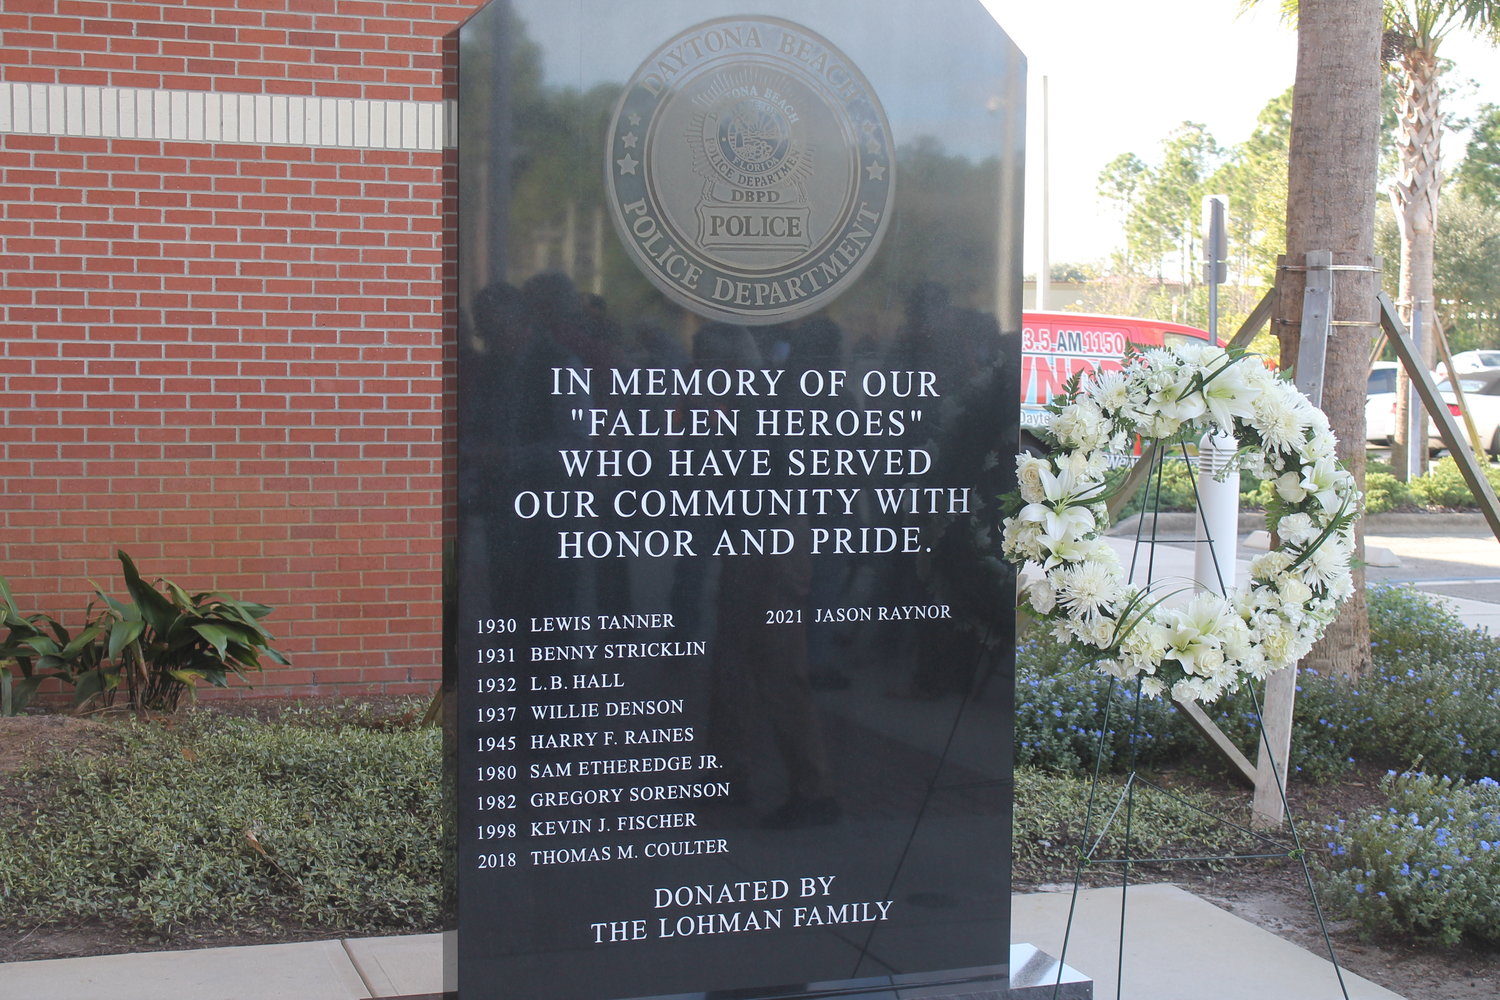 The new memorial in front of the DBPD headquarters, now featuring Officer Jason Raynor's name